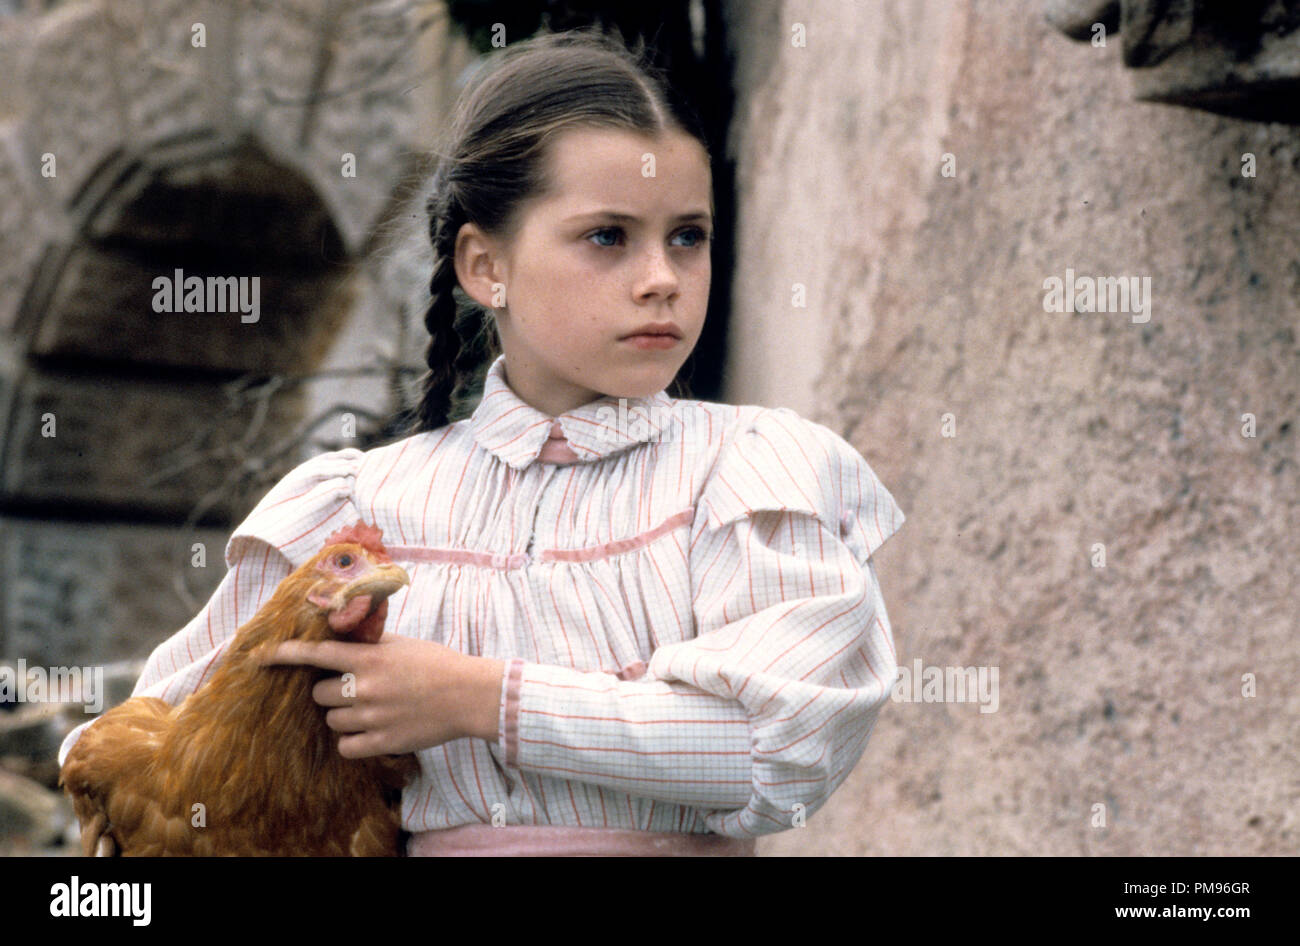 Studio Publicity Still from 'Return to Oz' Fairuza Balk © 1985 Walt Disney Pictures   All Rights Reserved   File Reference # 31703121THA  For Editorial Use Only Stock Photo